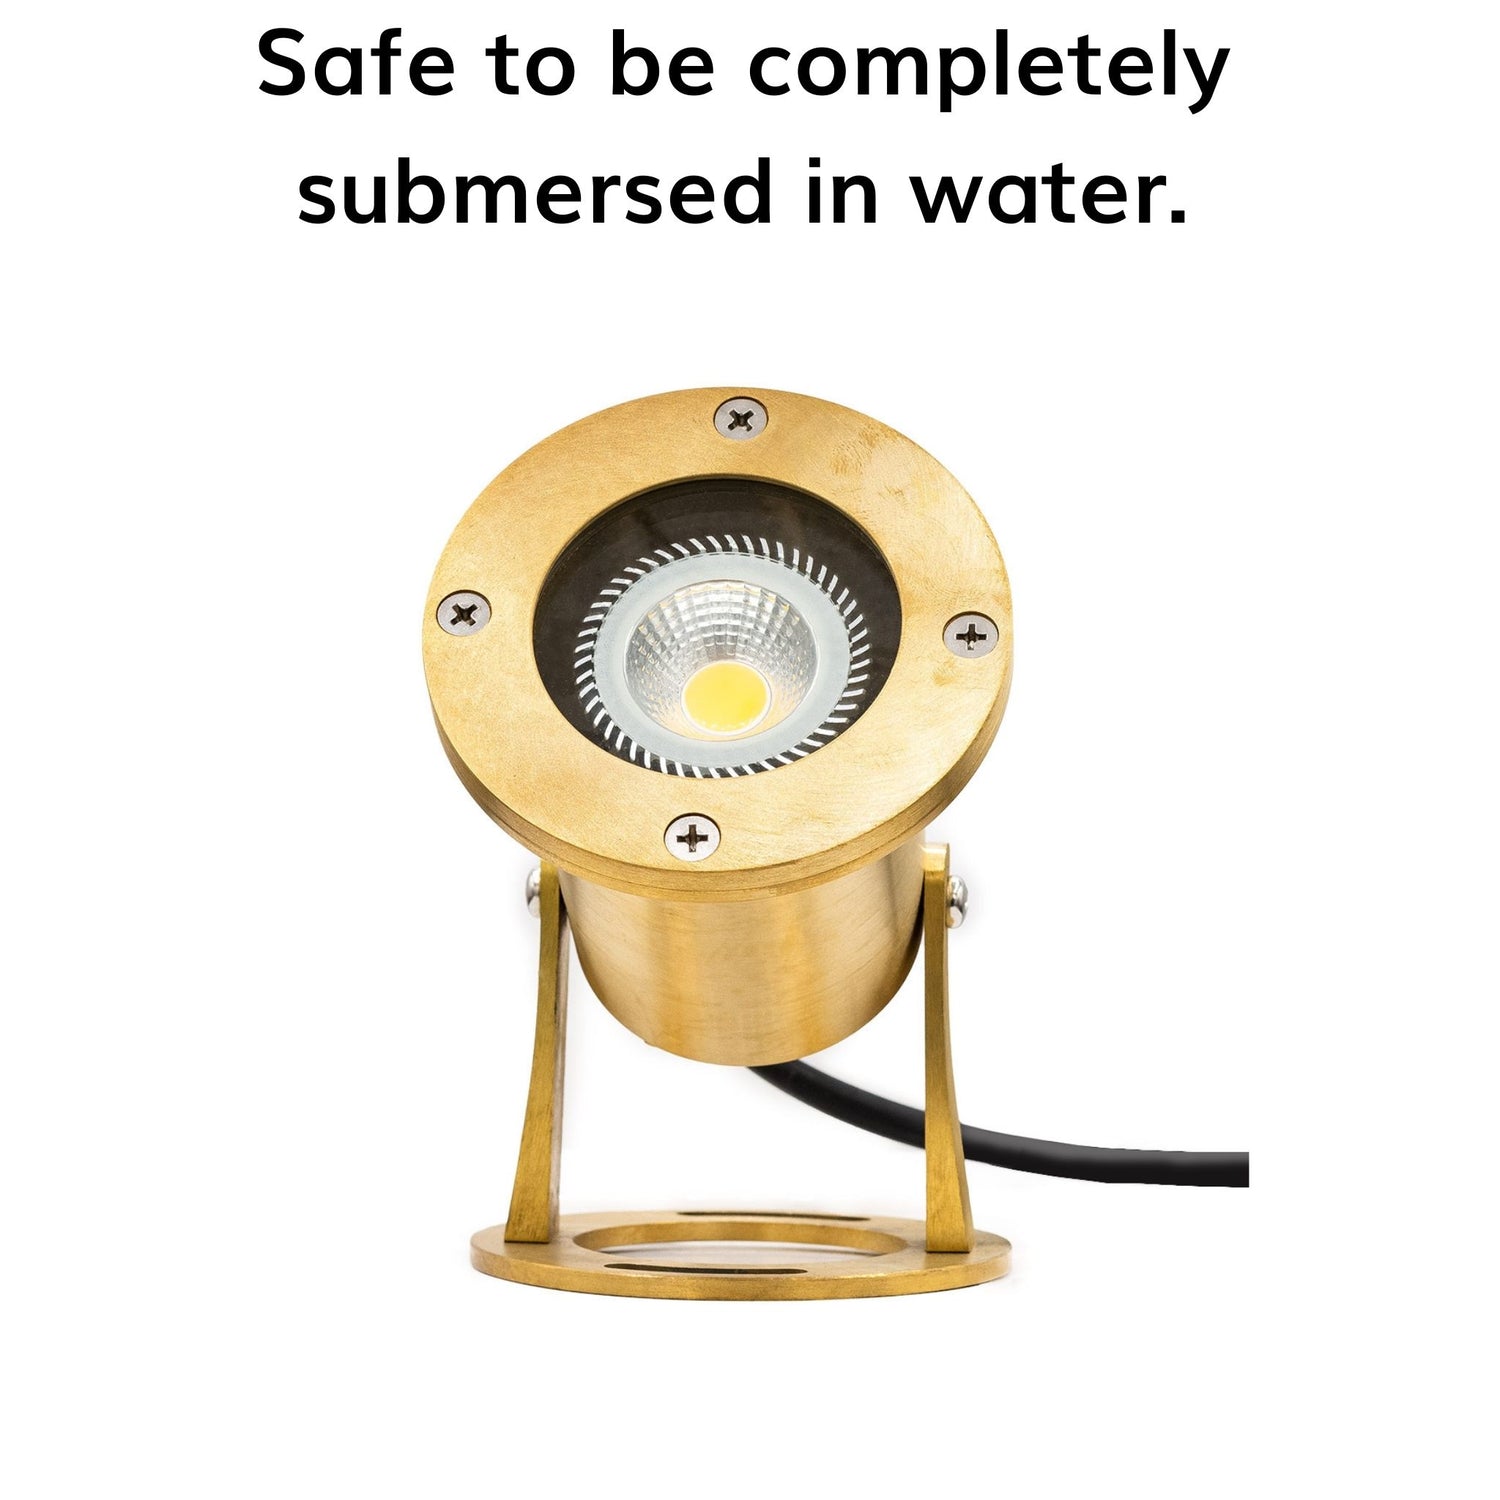 LED Pond Lights are safe to be completely submersed in water.